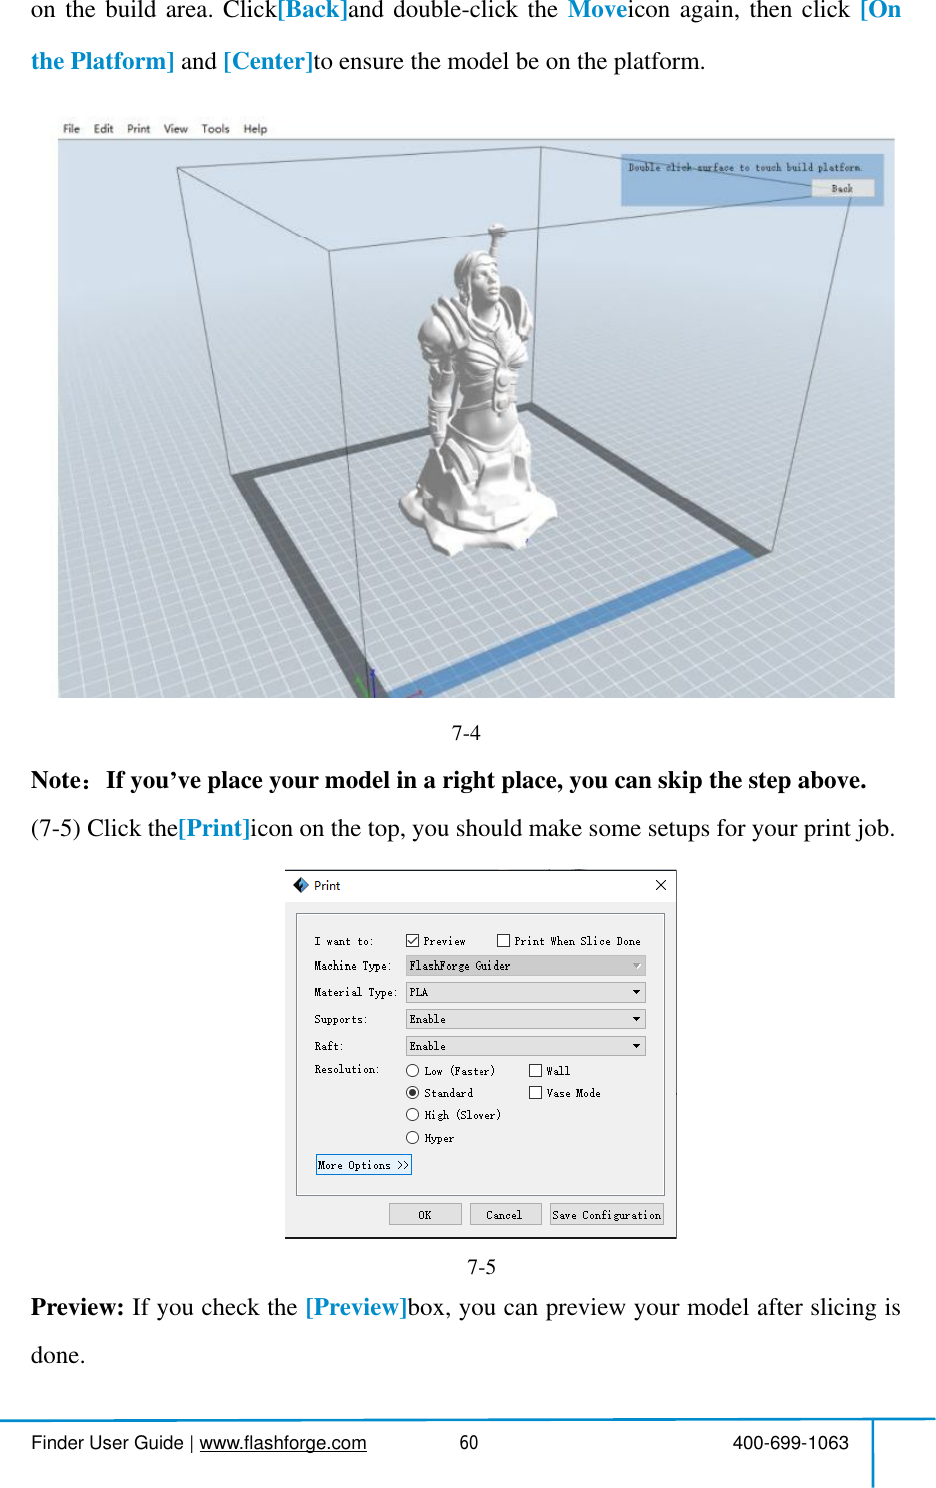  Finder User Guide|www.flashforge.com 400-699-106360onthebuildarea.Click[Back]anddouble-clickthe Moveiconagain,thenclick [Onthe Platform] and [Center]toensurethemodel be on the platform.7-4Note If you ve placeyourmodelin a right place, you can skipthe step above. (7-5)Clickthe[Print]icon on thetop, you shouldmake somesetupsforyour printjob.Preview: Ifyoucheckthe [Preview]box,youcanpreviewyourmodelafterslicingisdone.7-5